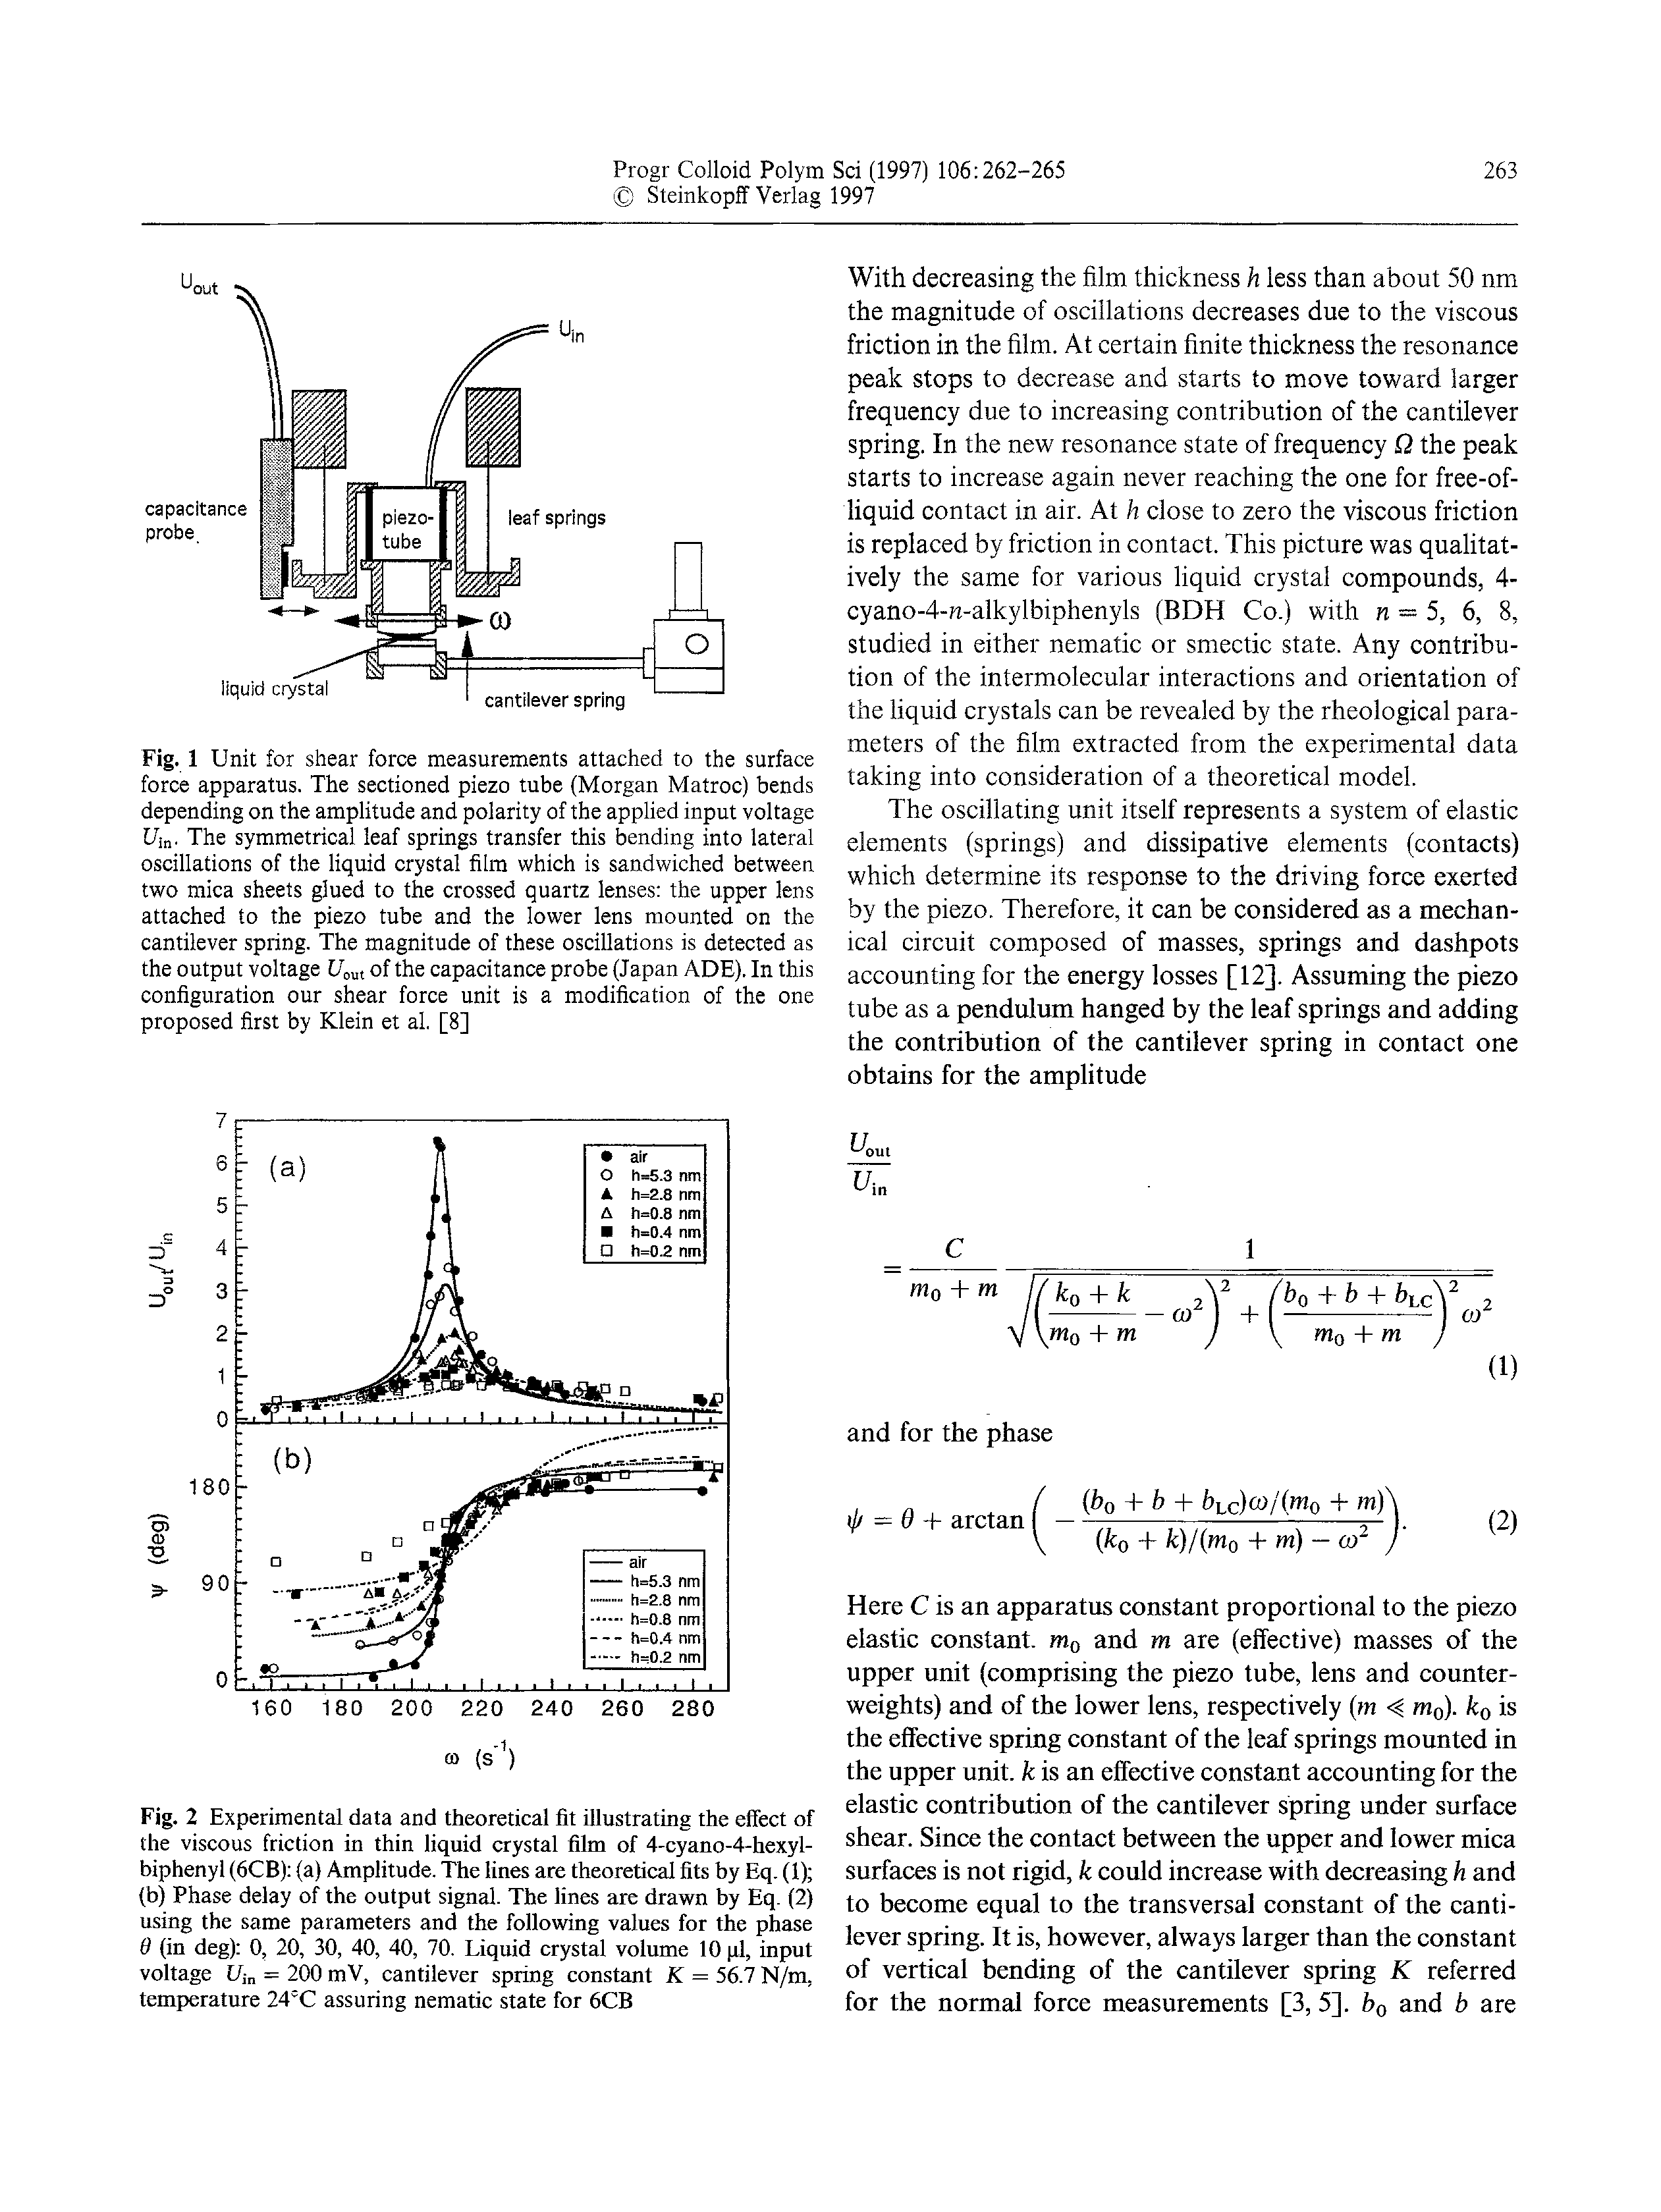 Fig. 1 Unit for shear force measurements attached to the surface force apparatus. The sectioned piezo tube (Morgan Matroc) bends depending on the amplitude and polarity of the applied input voltage 17in. The symmetrical leaf springs transfer this bending into lateral oscillations of the liquid crystal film which is sandwiched between two mica sheets glued to the crossed quartz lenses the upper lens attached to the piezo tube and the lower lens mounted on the cantilever spring. The magnitude of these oscillations is detected as the output voltage Uom of the capacitance probe (Japan ADE). In this configuration our shear force unit is a modification of the one proposed first by Klein et al. [8]...